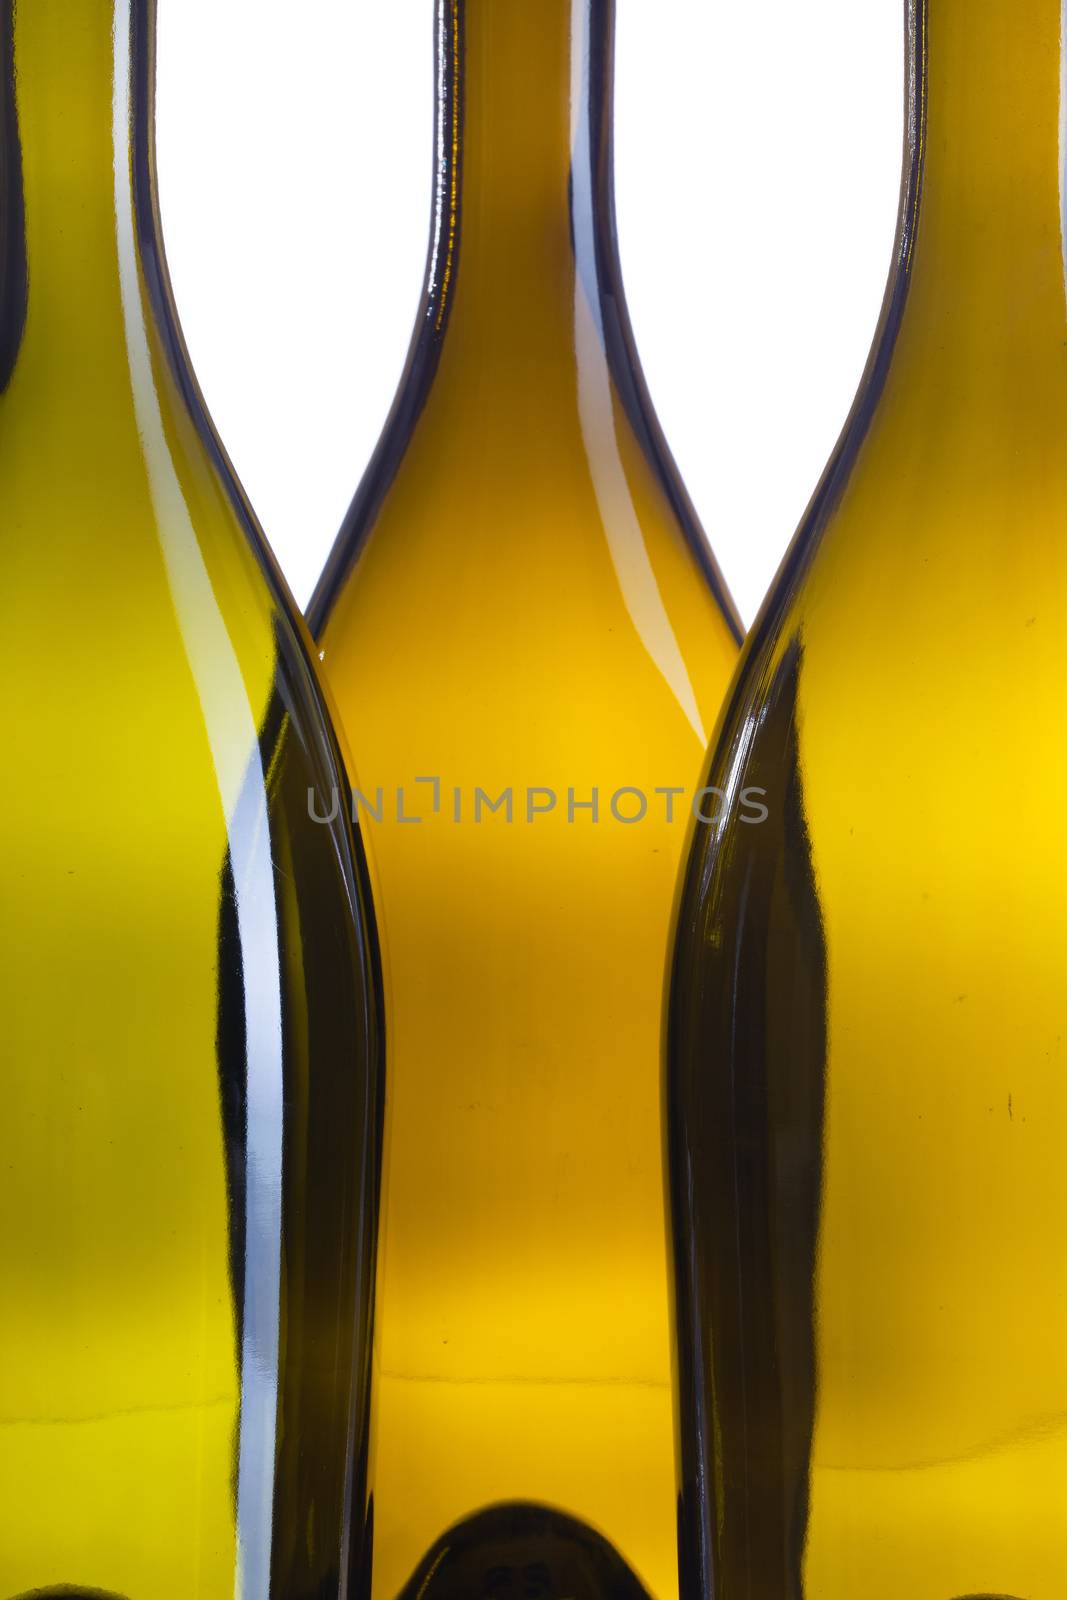 Detail of three empty wine bottles on a white background